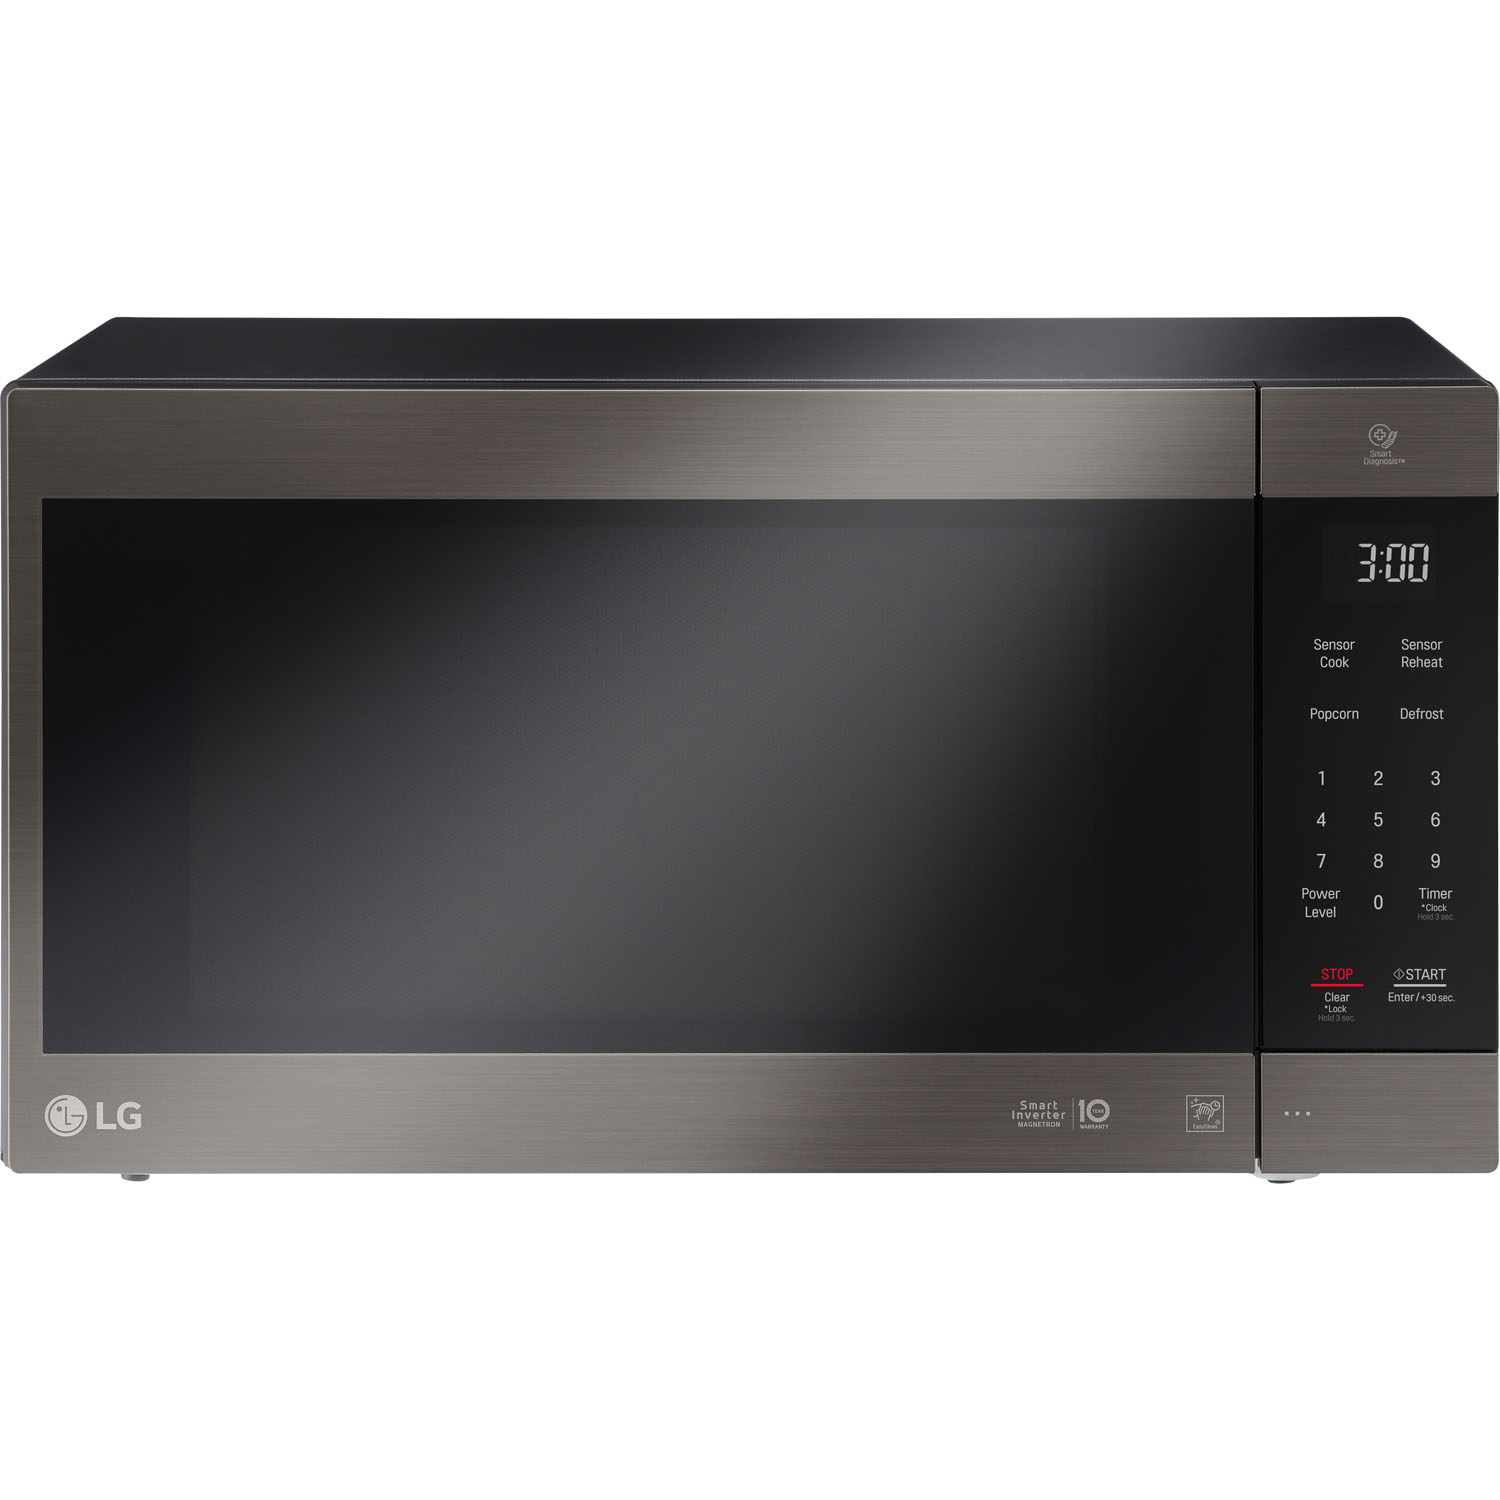 LG NeoChef 2.0 Cu. Ft. 1200W Countertop Microwave, Black Stainless Steel - image 1 of 8